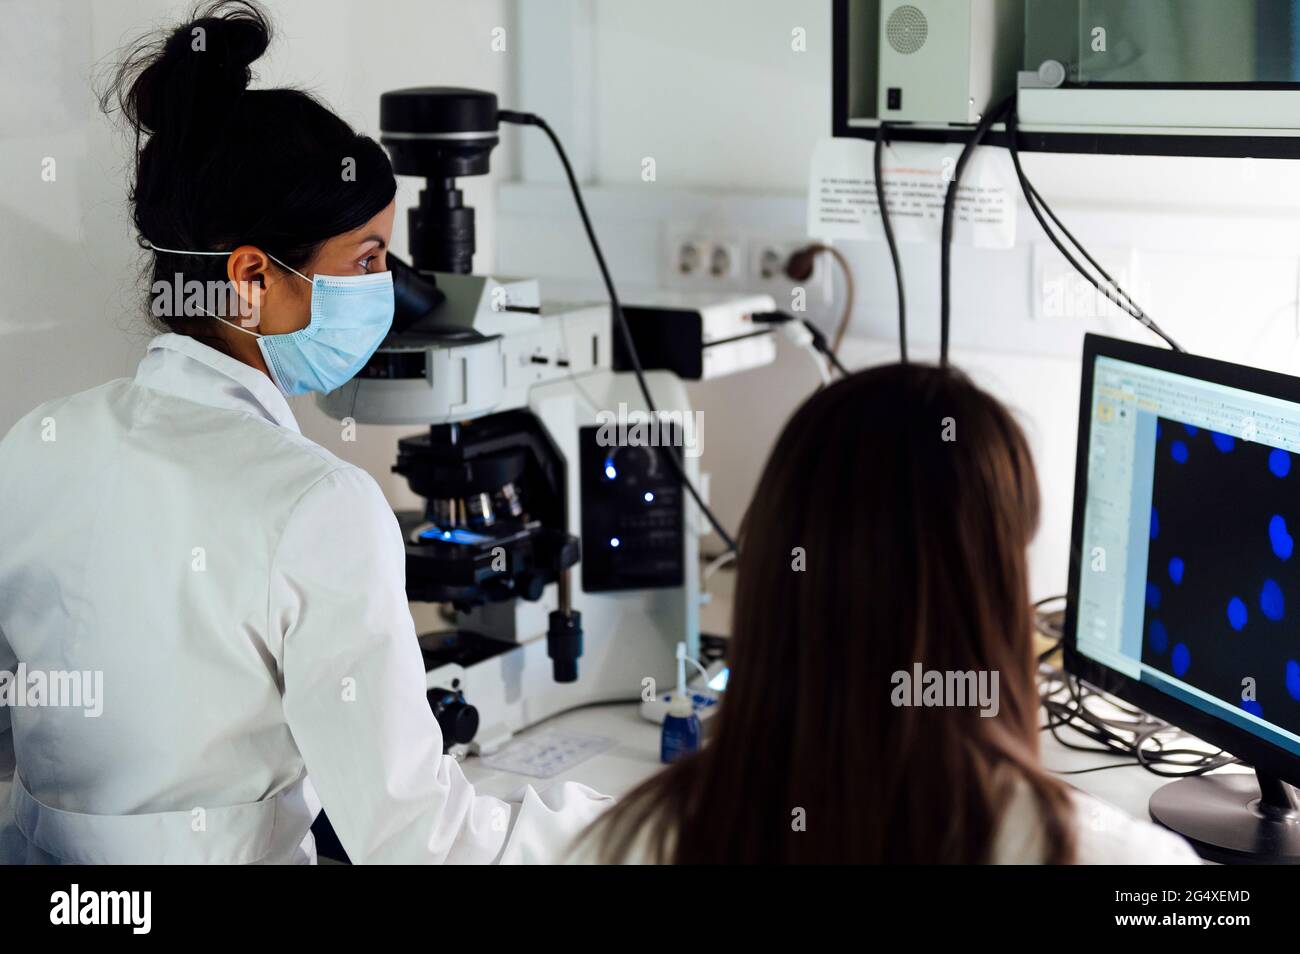 Female scientists working together while examining medical samples on computer in laboratory during COVID-19 Stock Photo